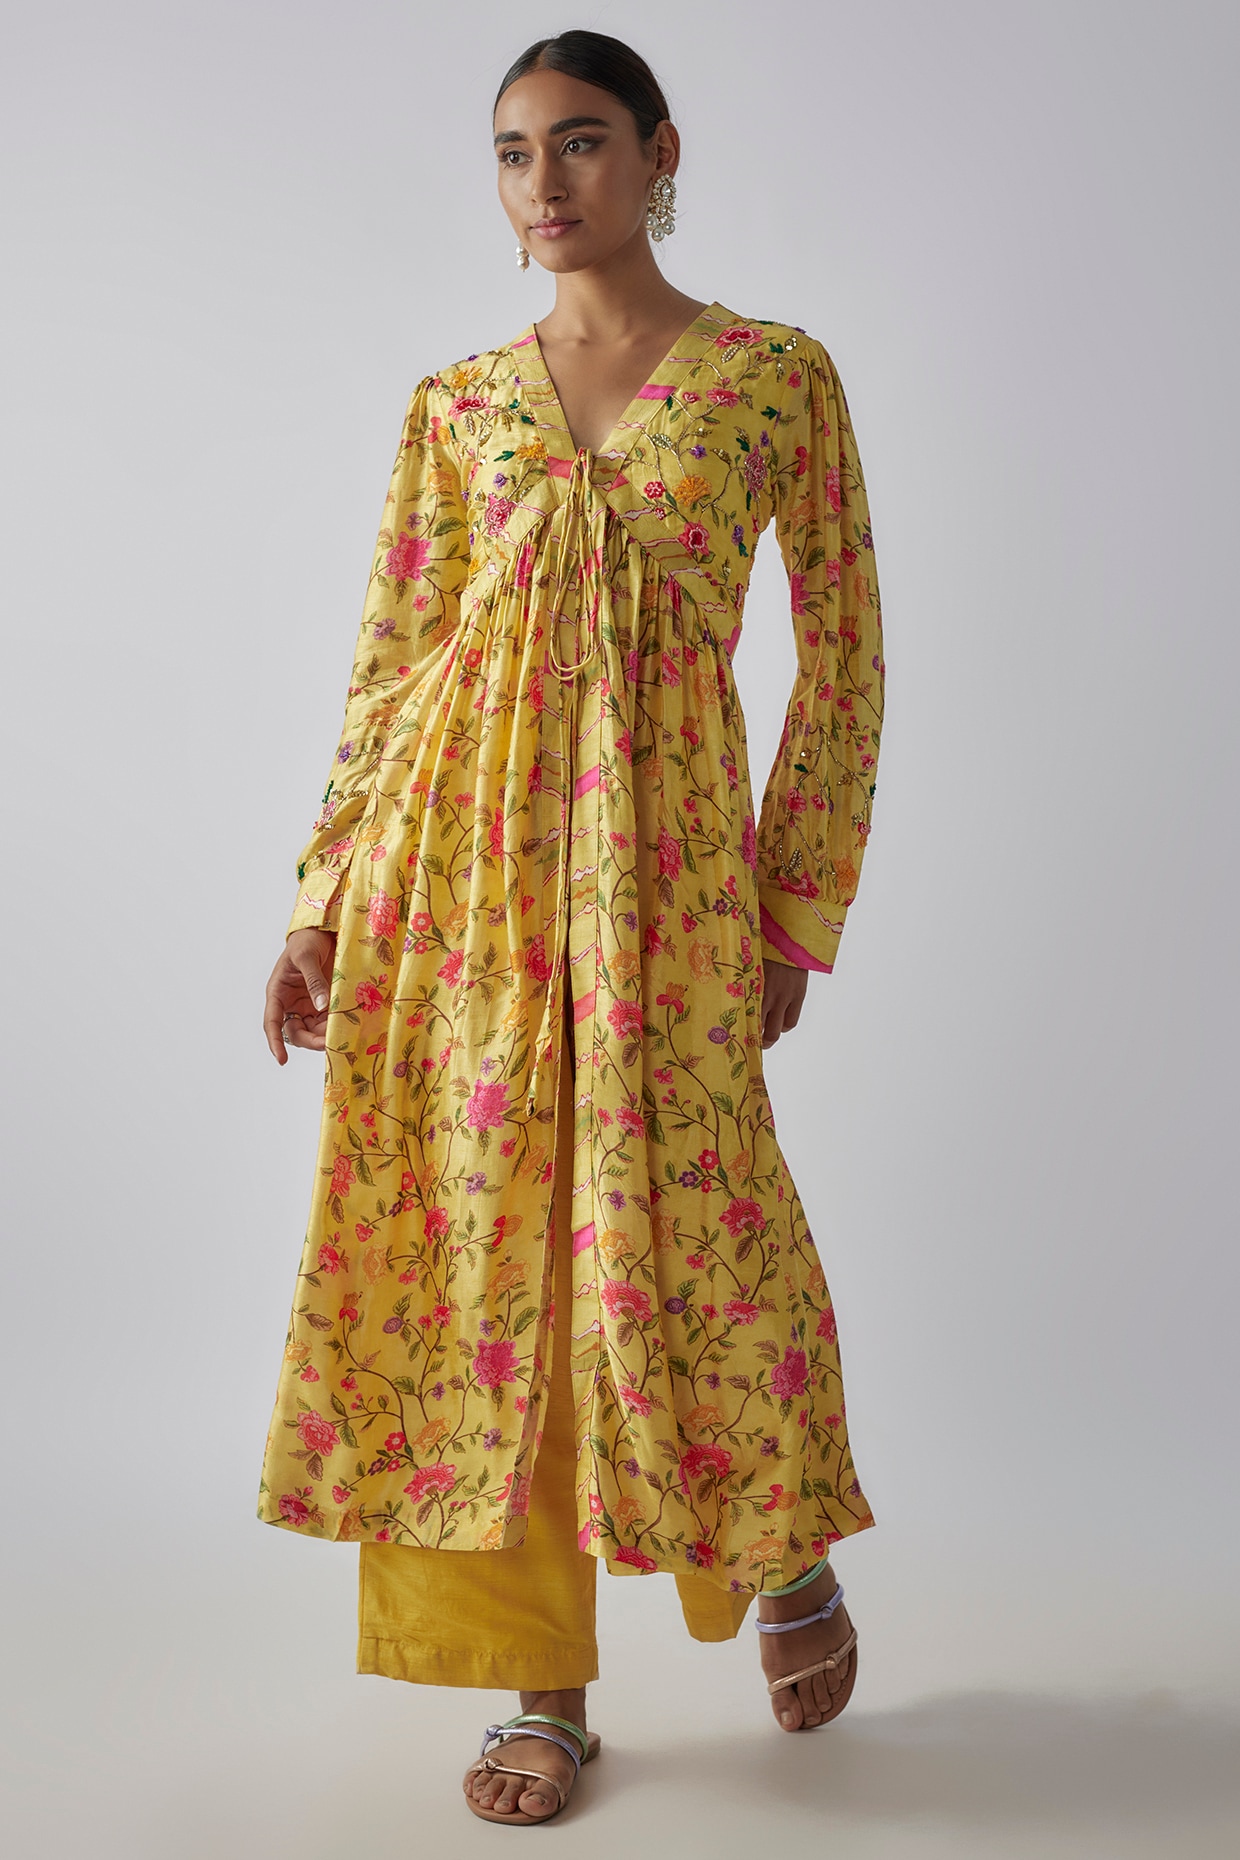 The Indian Dressing Room - Cotton Plain Lace Work Yellow Unstitched Patiala  Suit #buy - https://goo.gl/Er7ThO Whatsapp/ Message - 9035506236 | Facebook